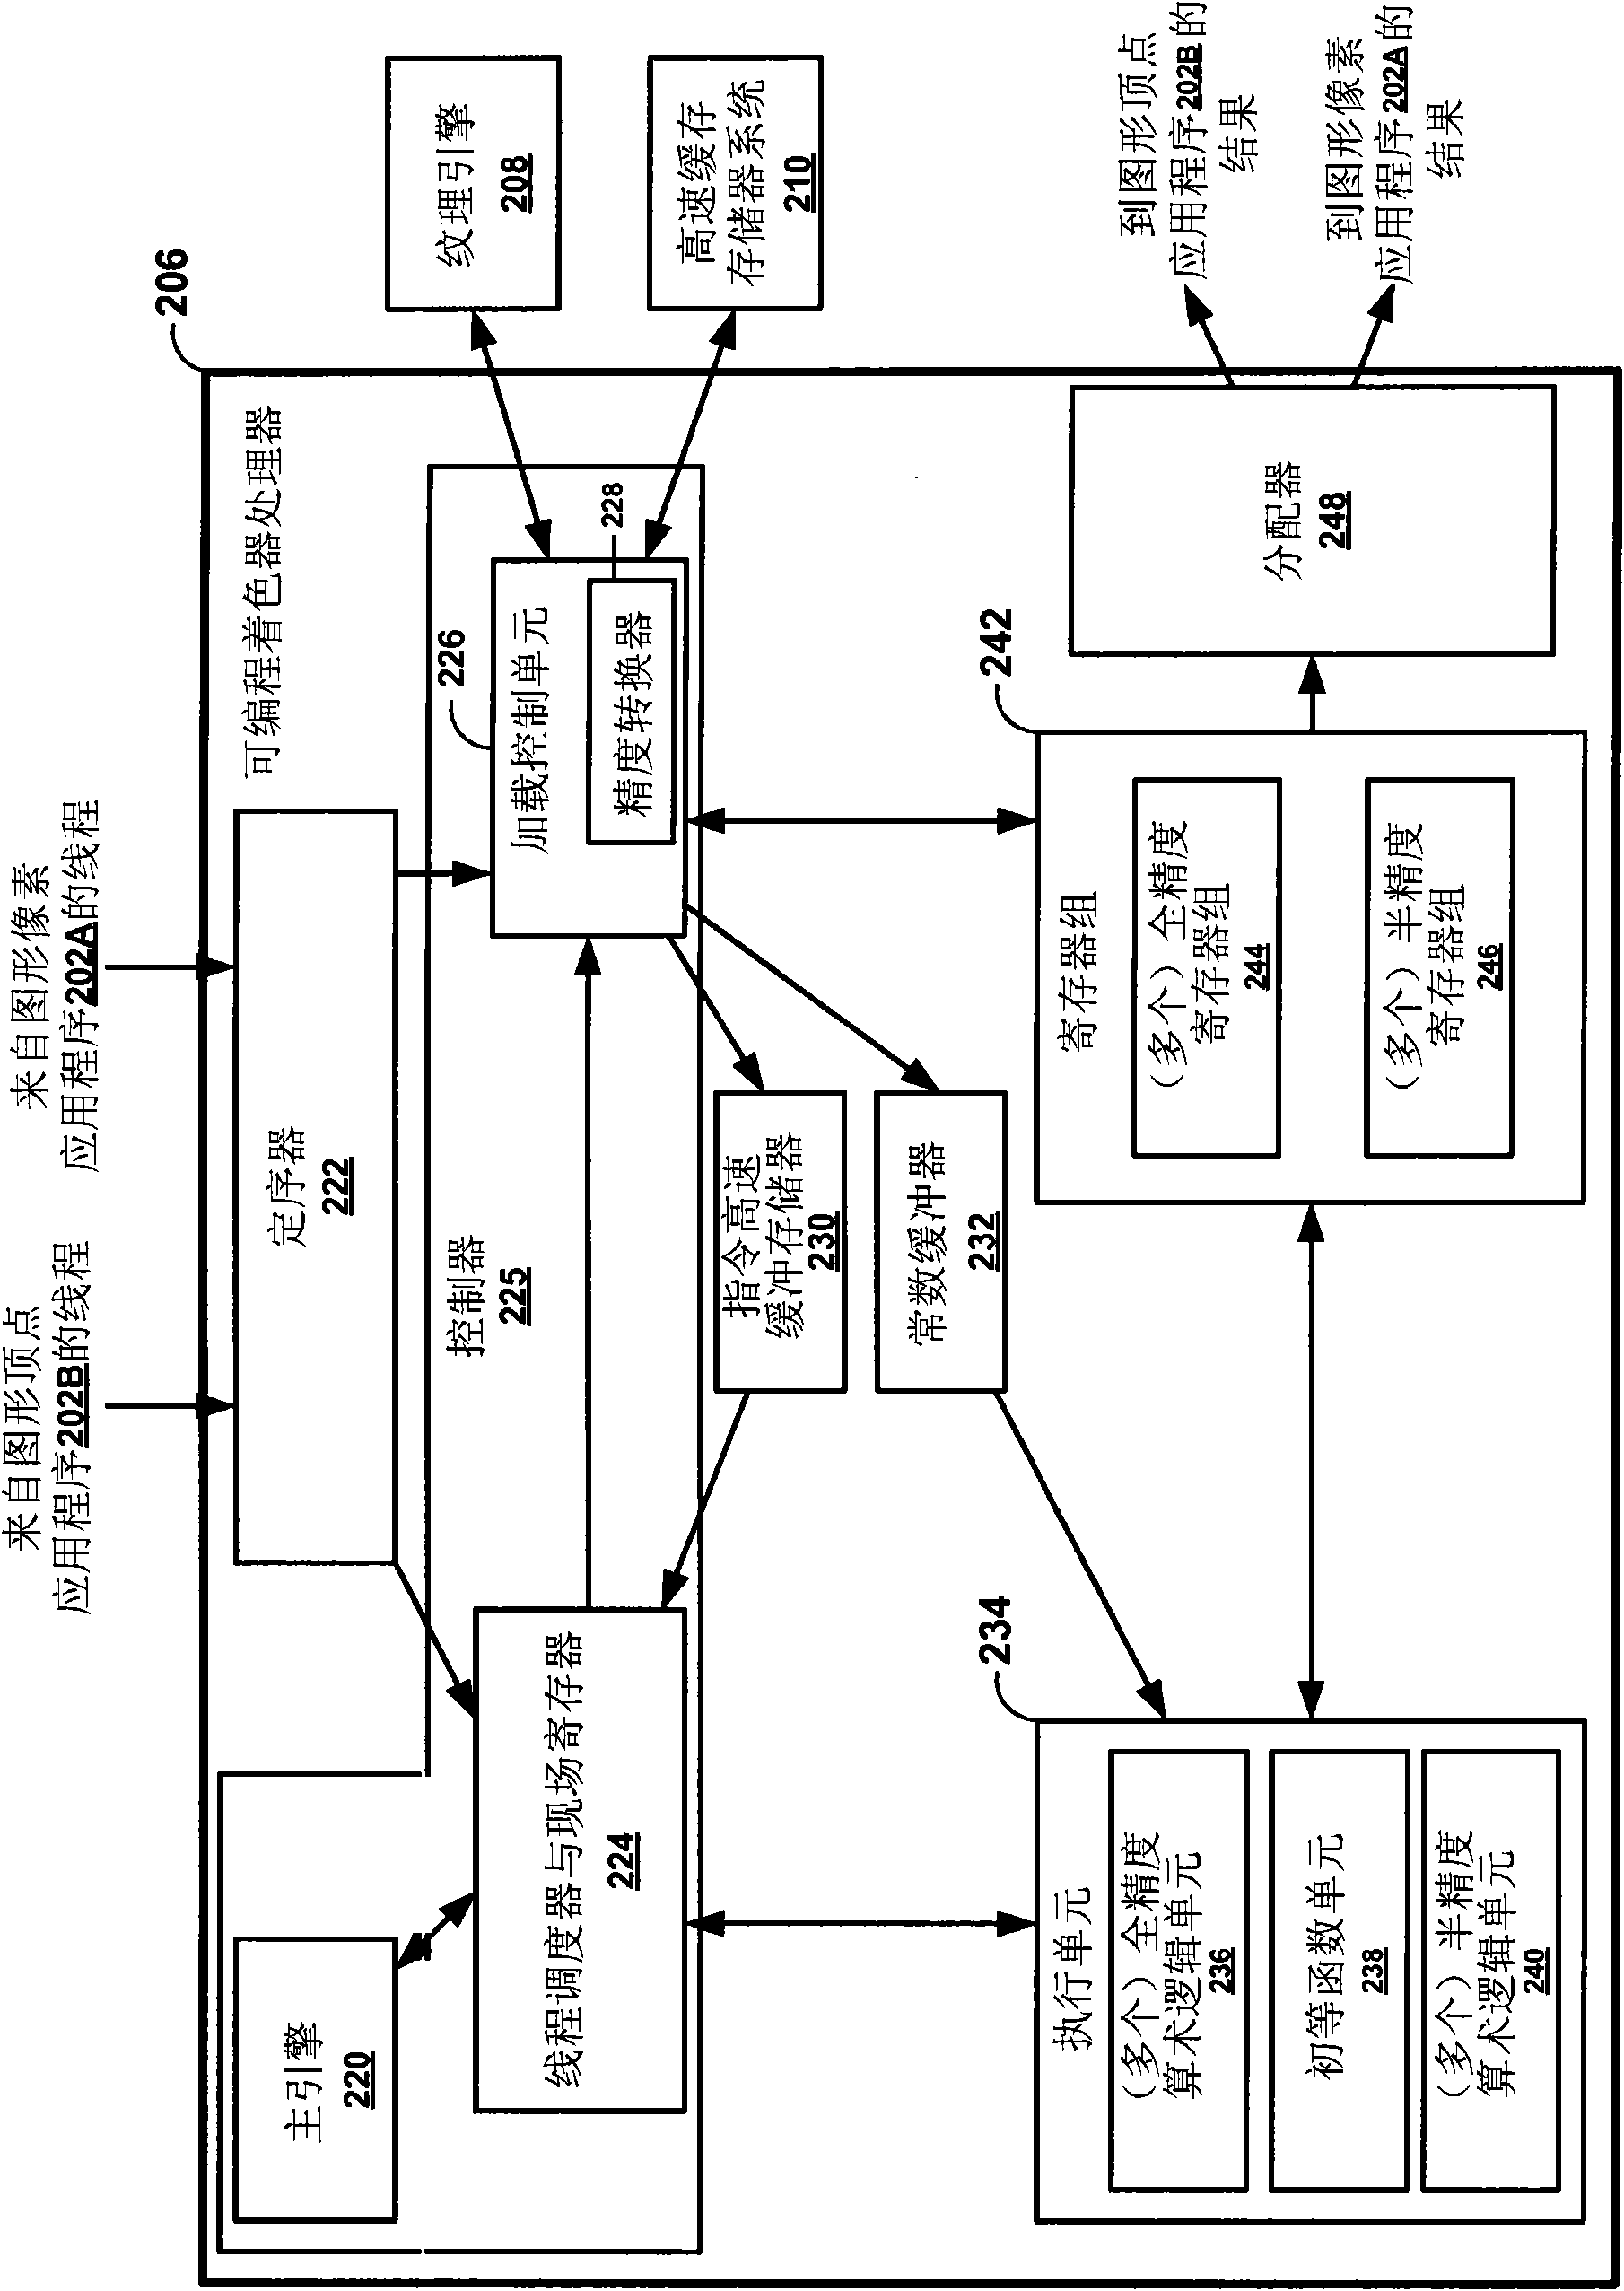 Programmable streaming processor with mixed precision instruction execution